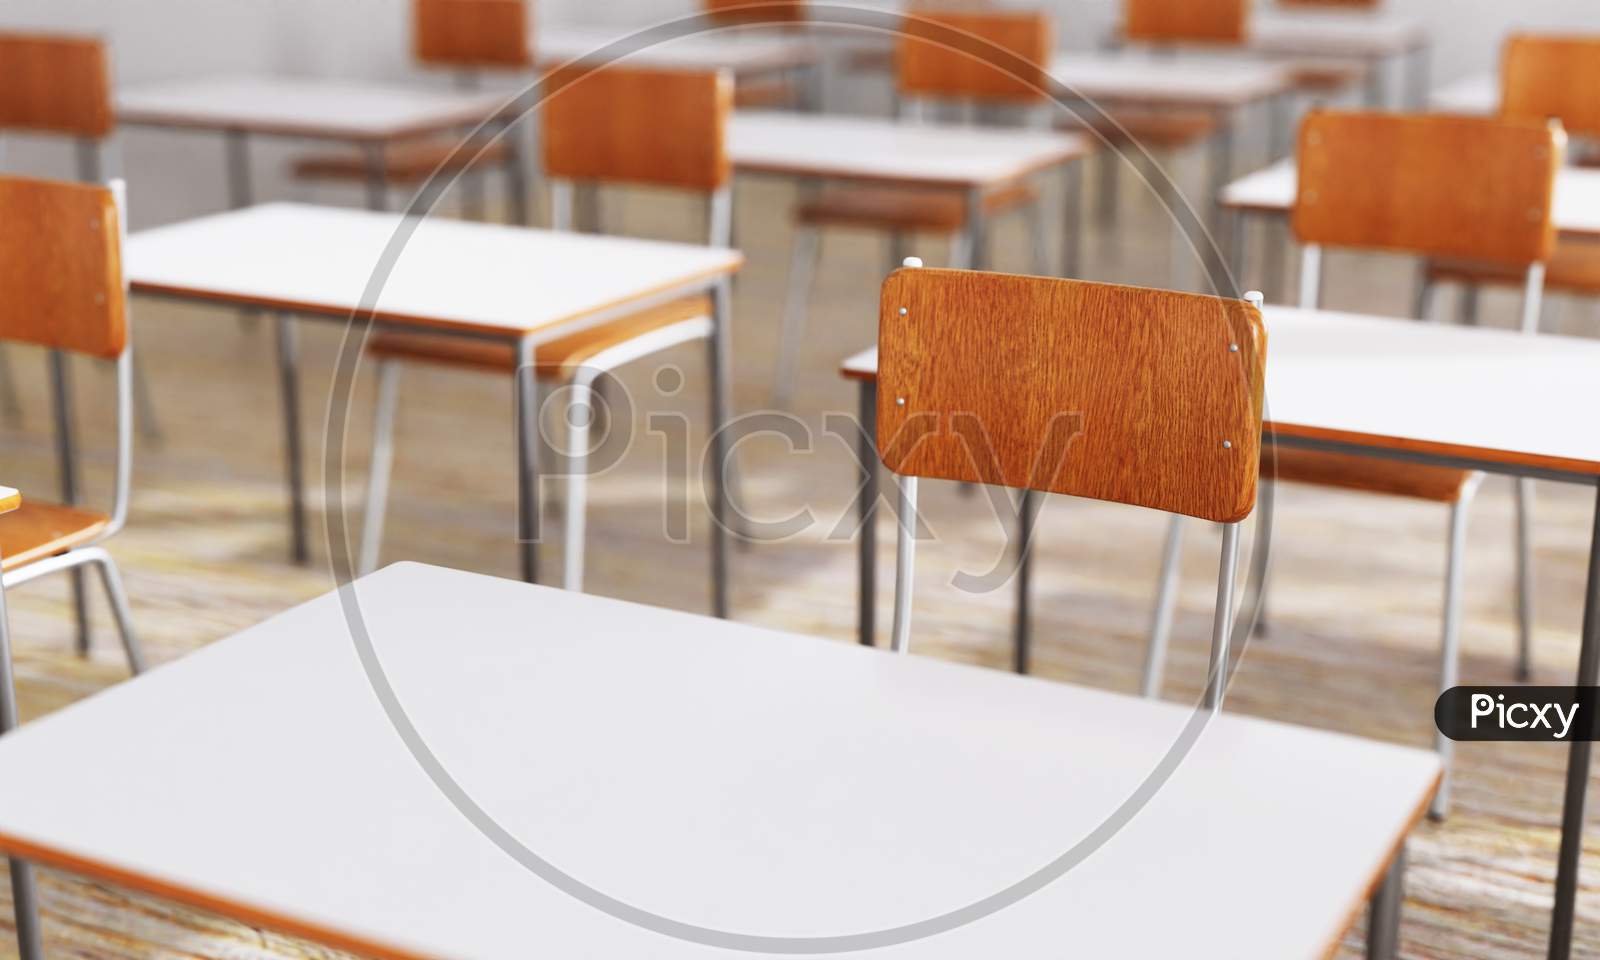 Closeup Student Chair Seat And Desk In Classroom Background With On Wooden Floor. Education And Back To School Concept. Architecture Interior. Social Distancing Theme. 3D Illustration Rendering